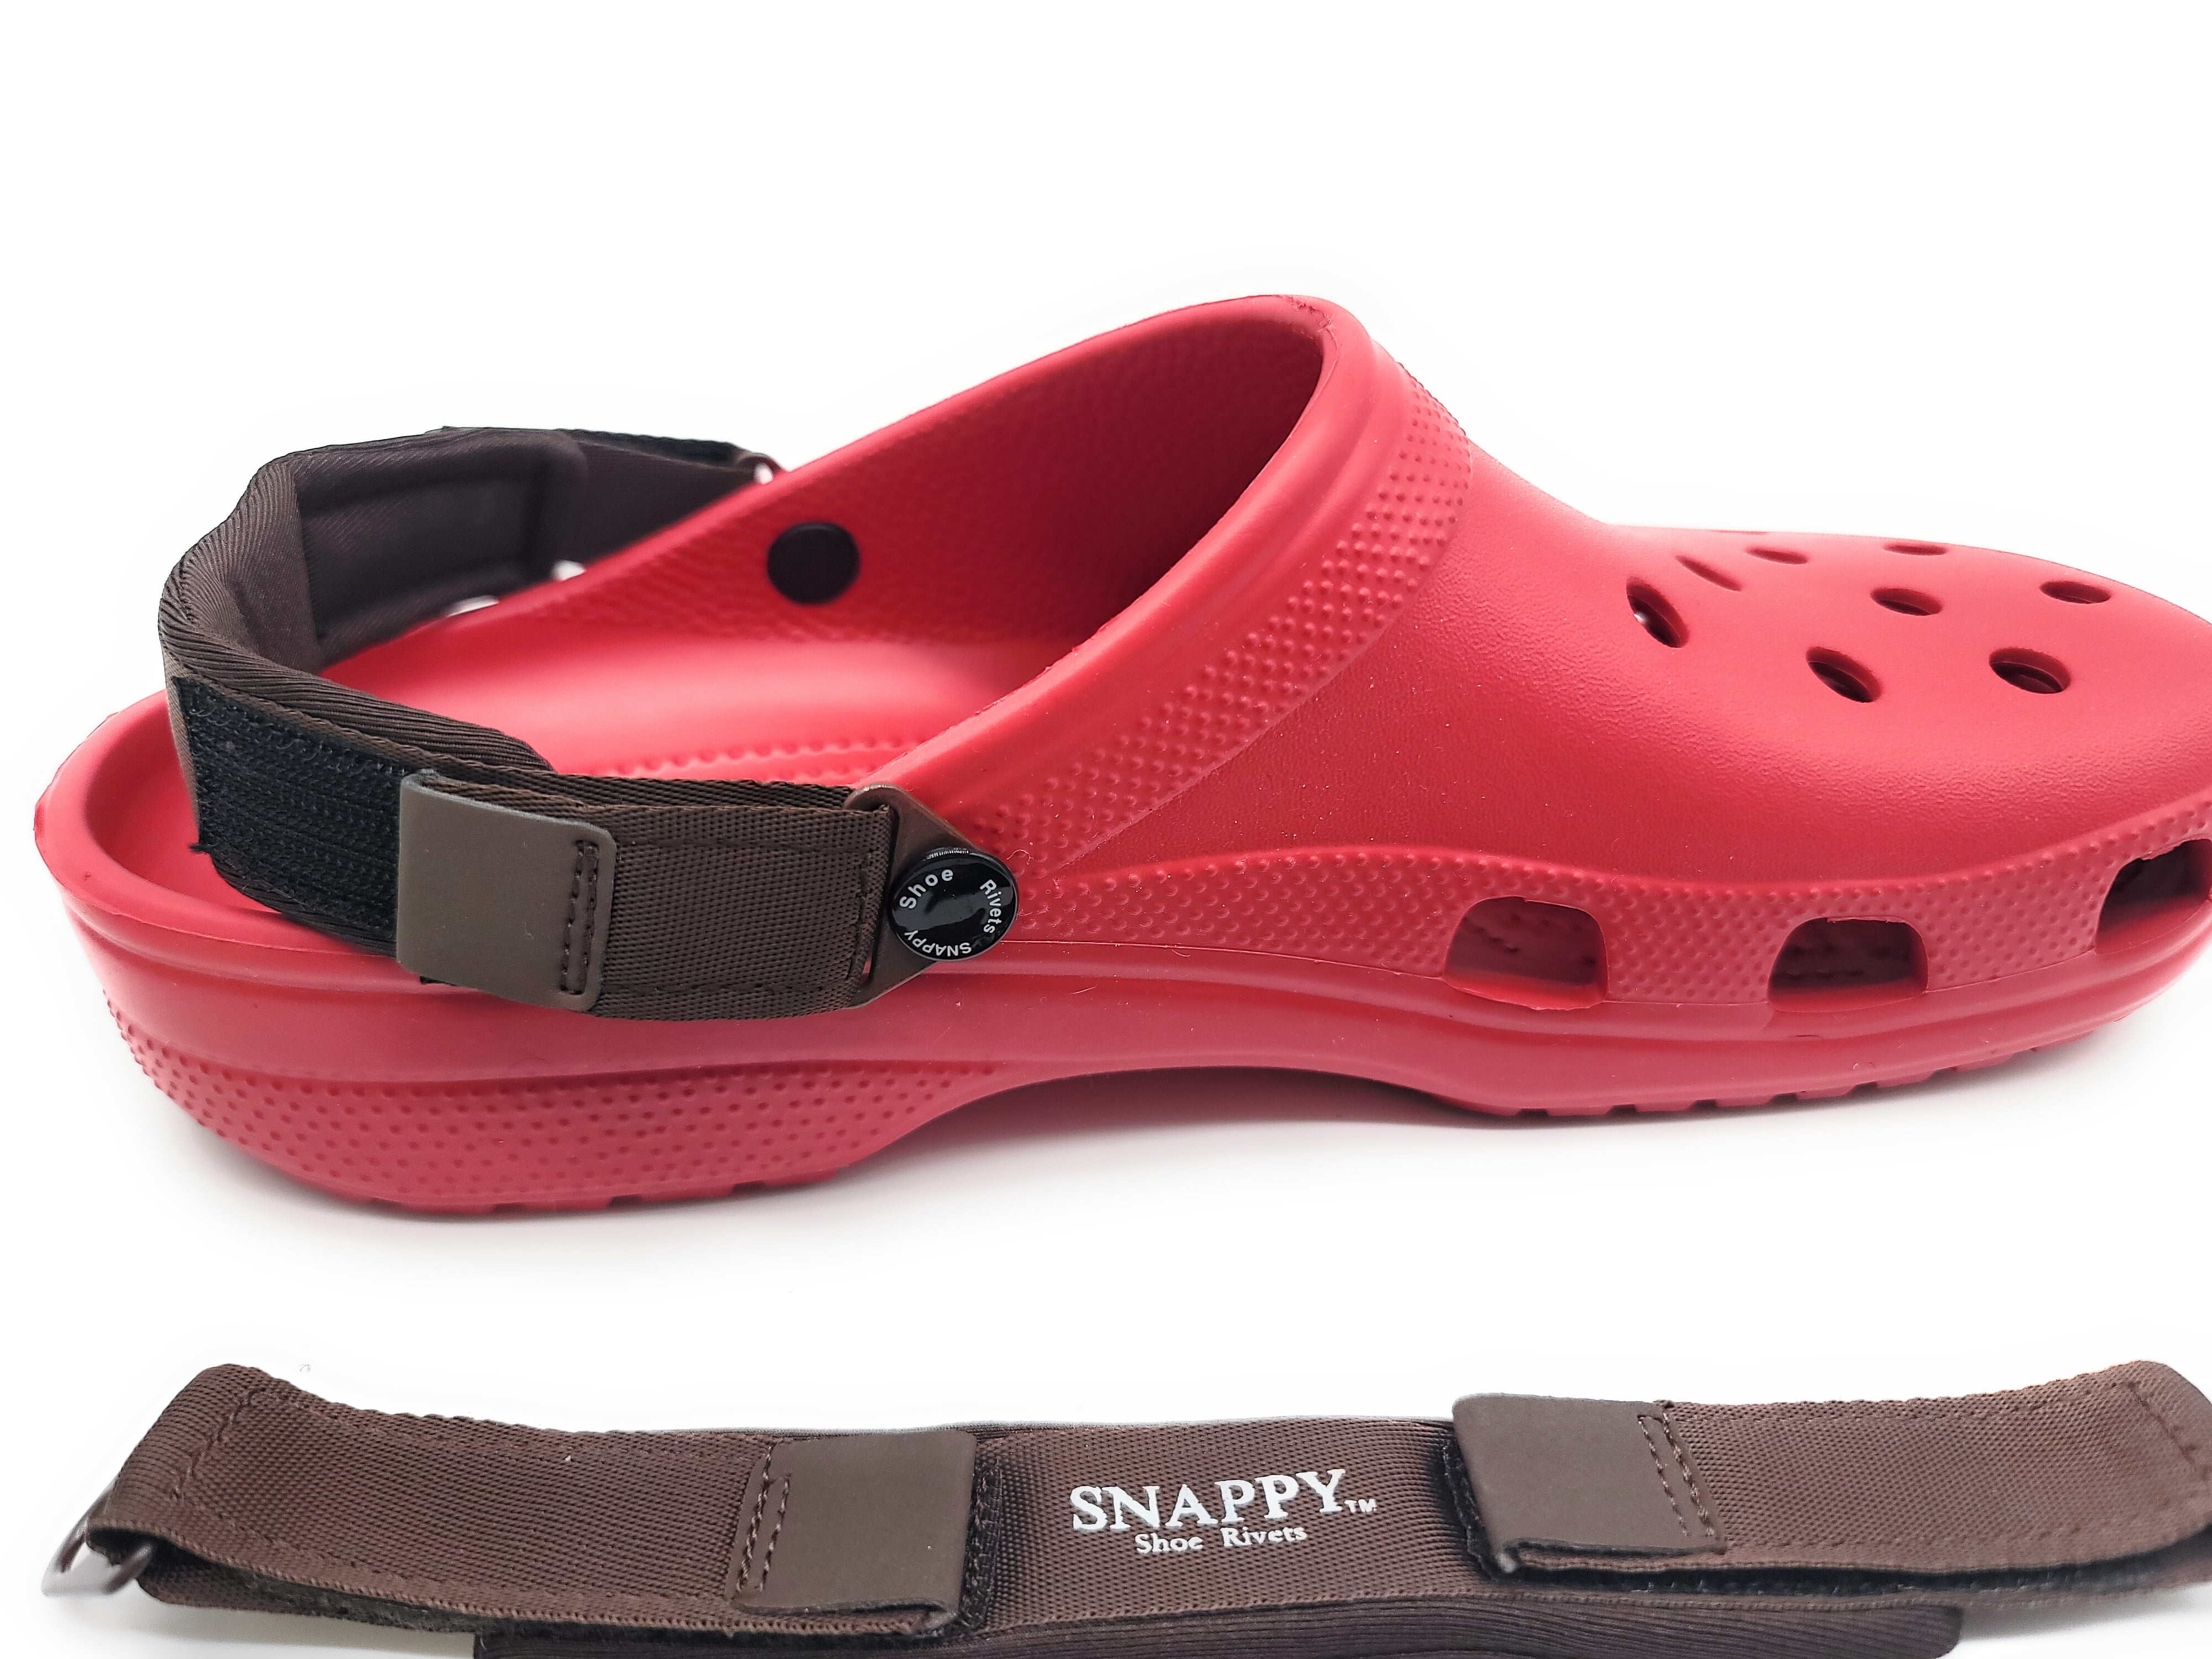 Snappy Shoe Rivets Adjustable Soft Replacement Heel Straps for Croc Shoes  Brown